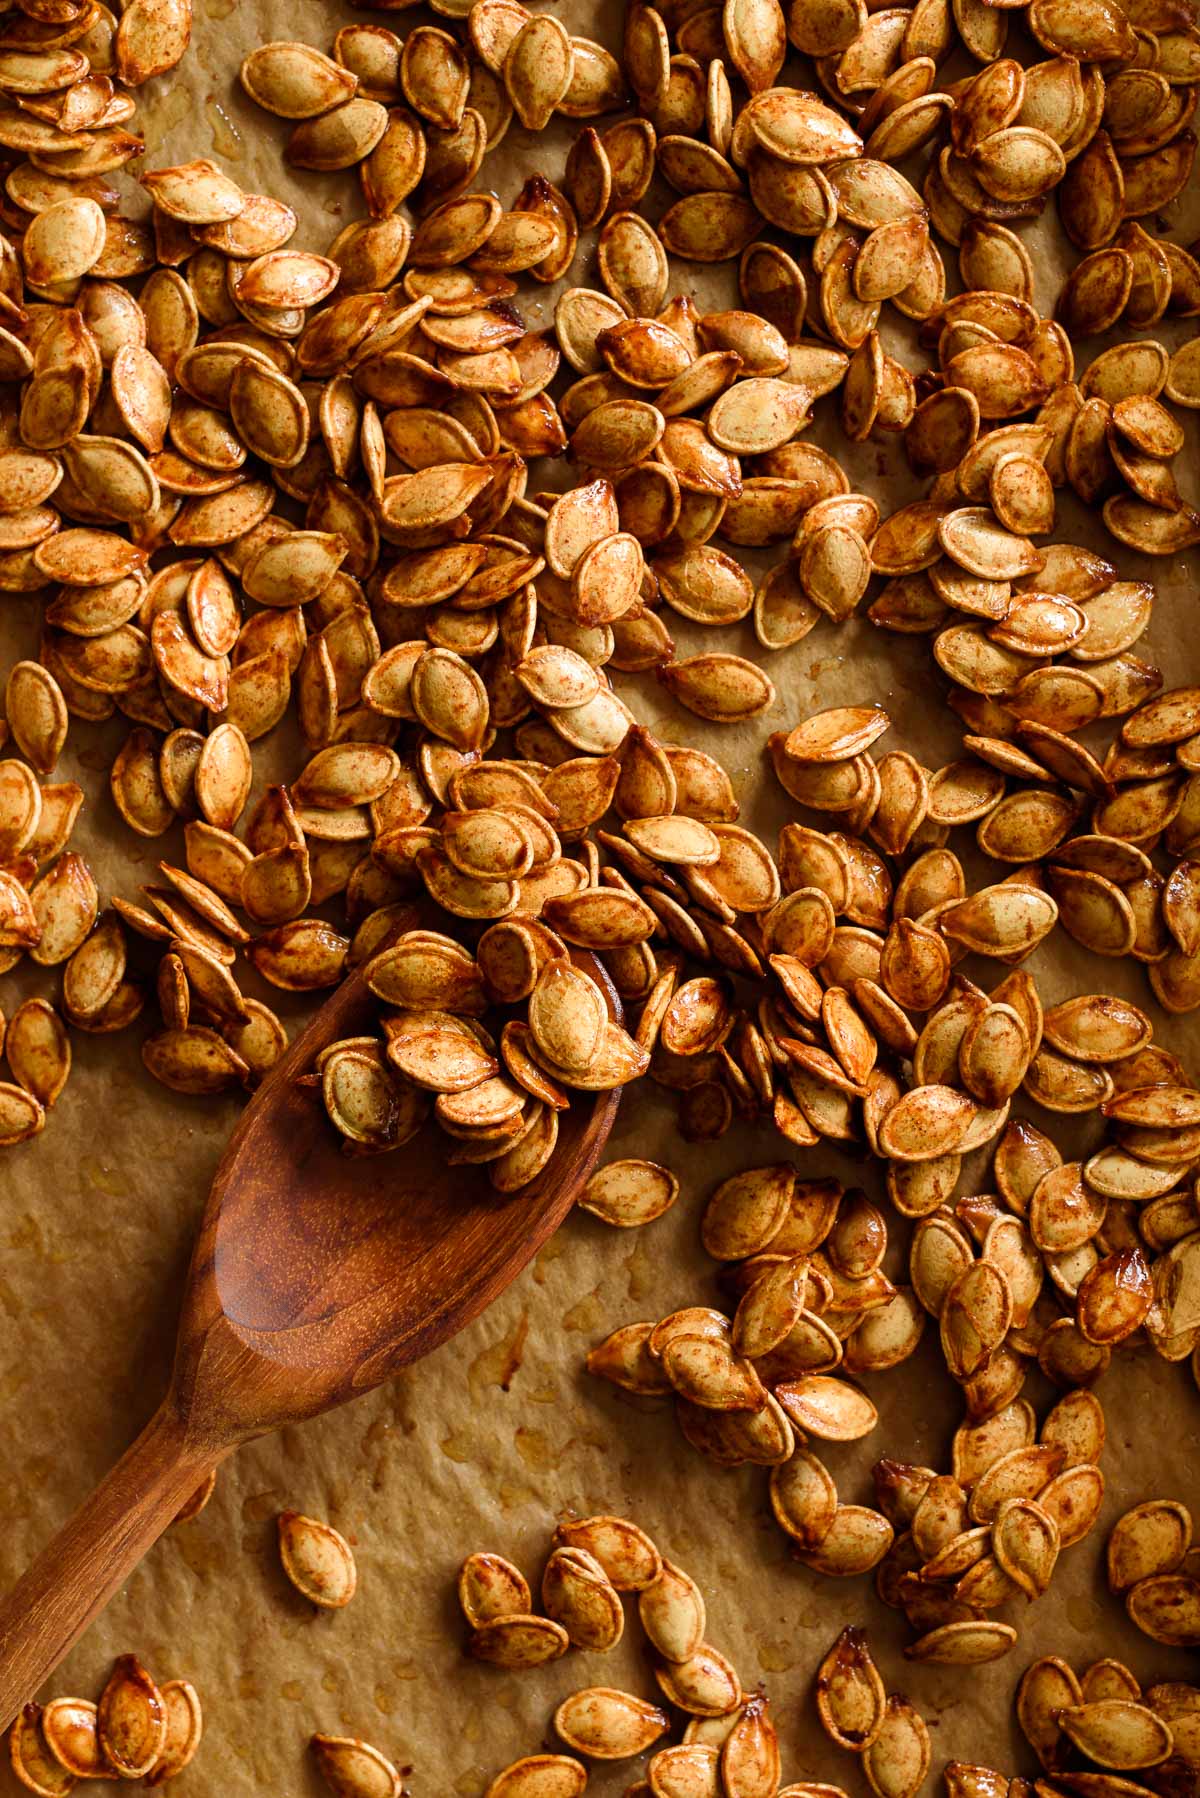 Roasted pumpkin seeds with brown sugar, butter, cinnamon, and salt on parchment paper.